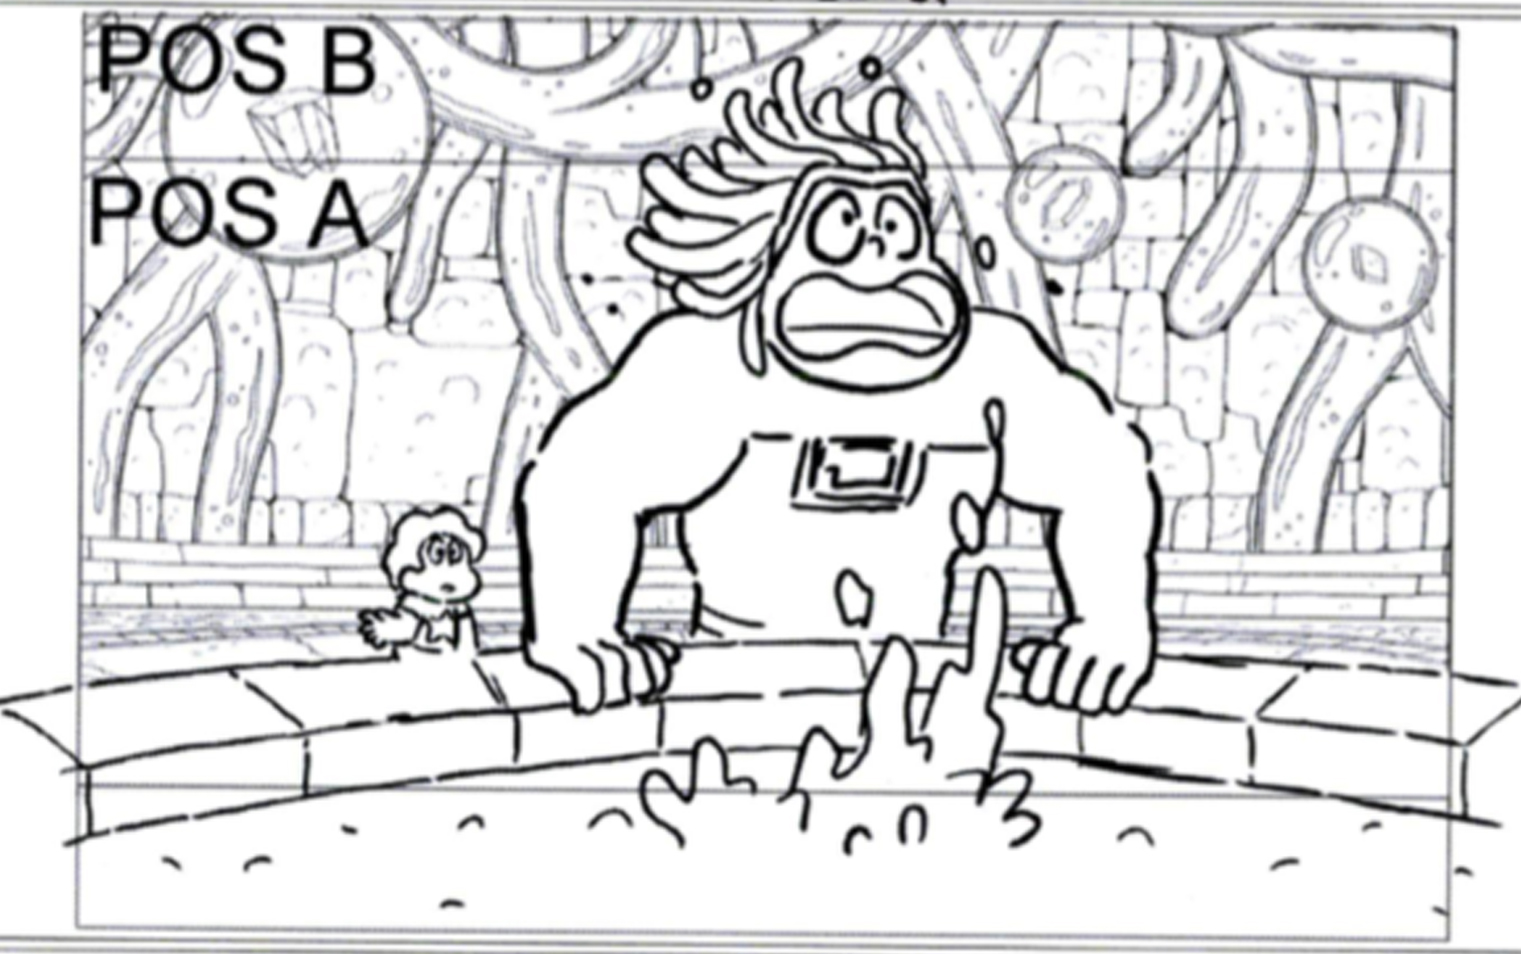 Storyboard panel from Steven Universe. Credit: Cartoon Network